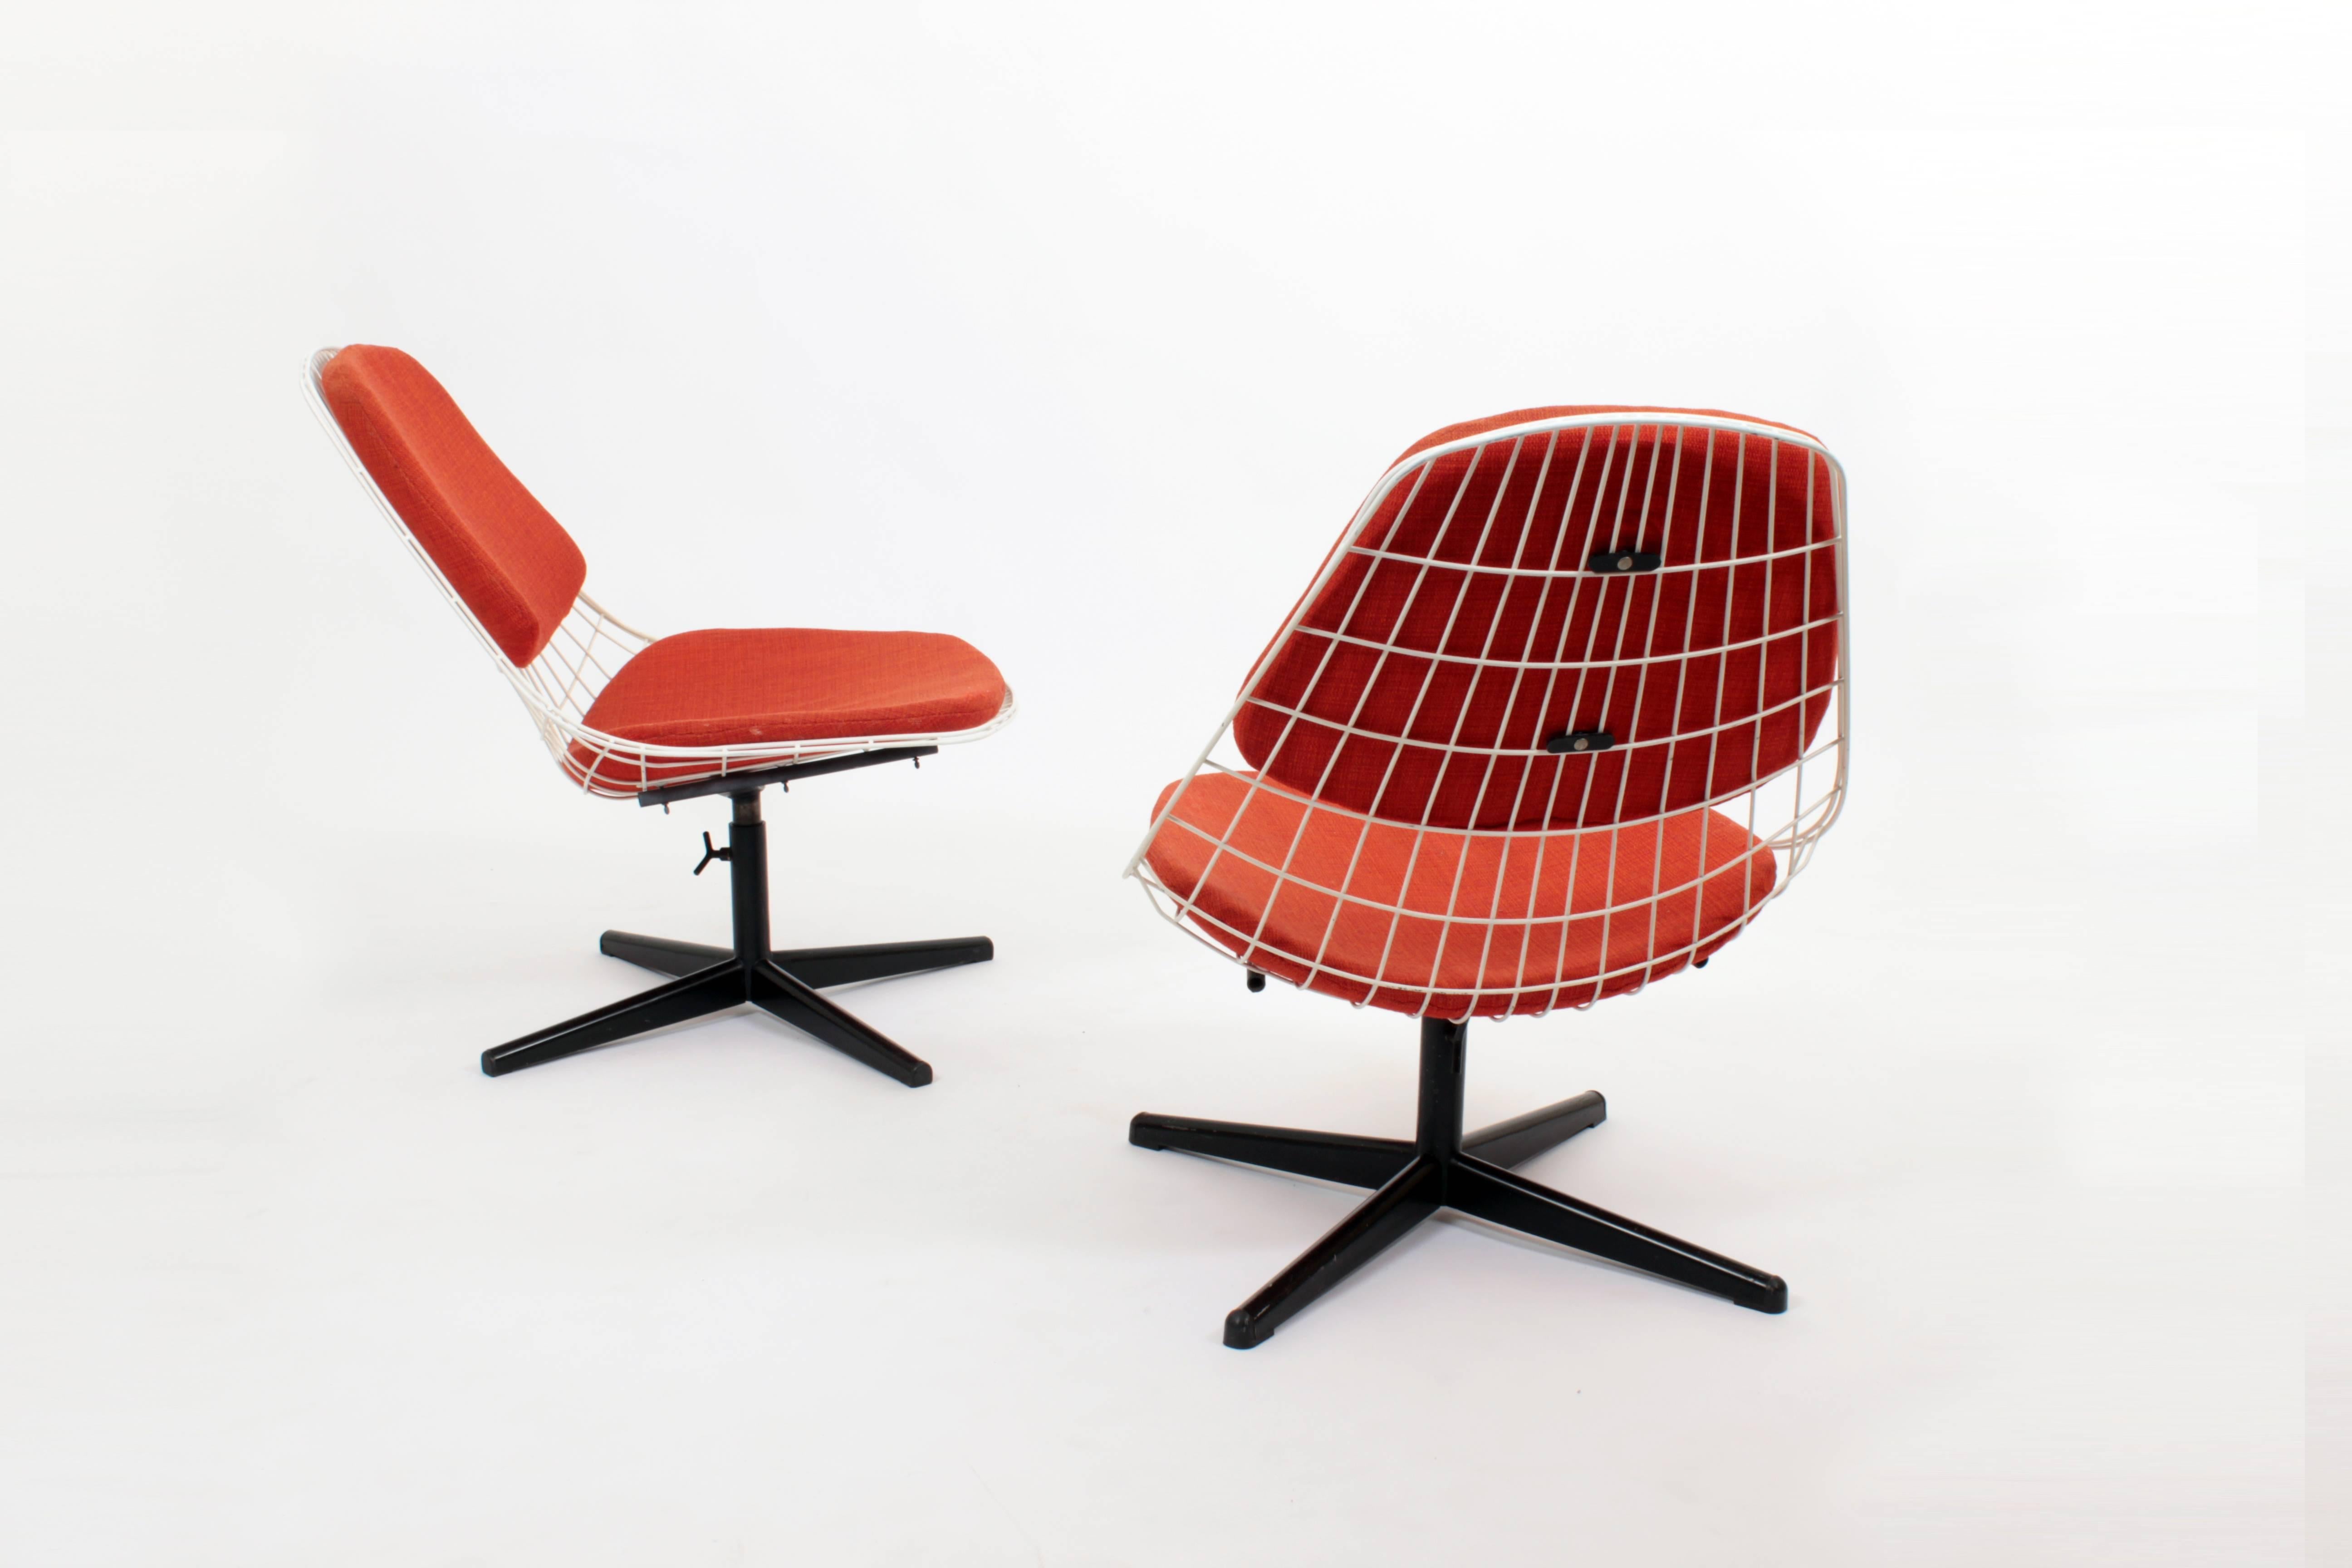 Lacquered Pair of FM25 Swivel Wire Chairs by Cees Braakman for Pastoe, Netherlands, 1950 For Sale